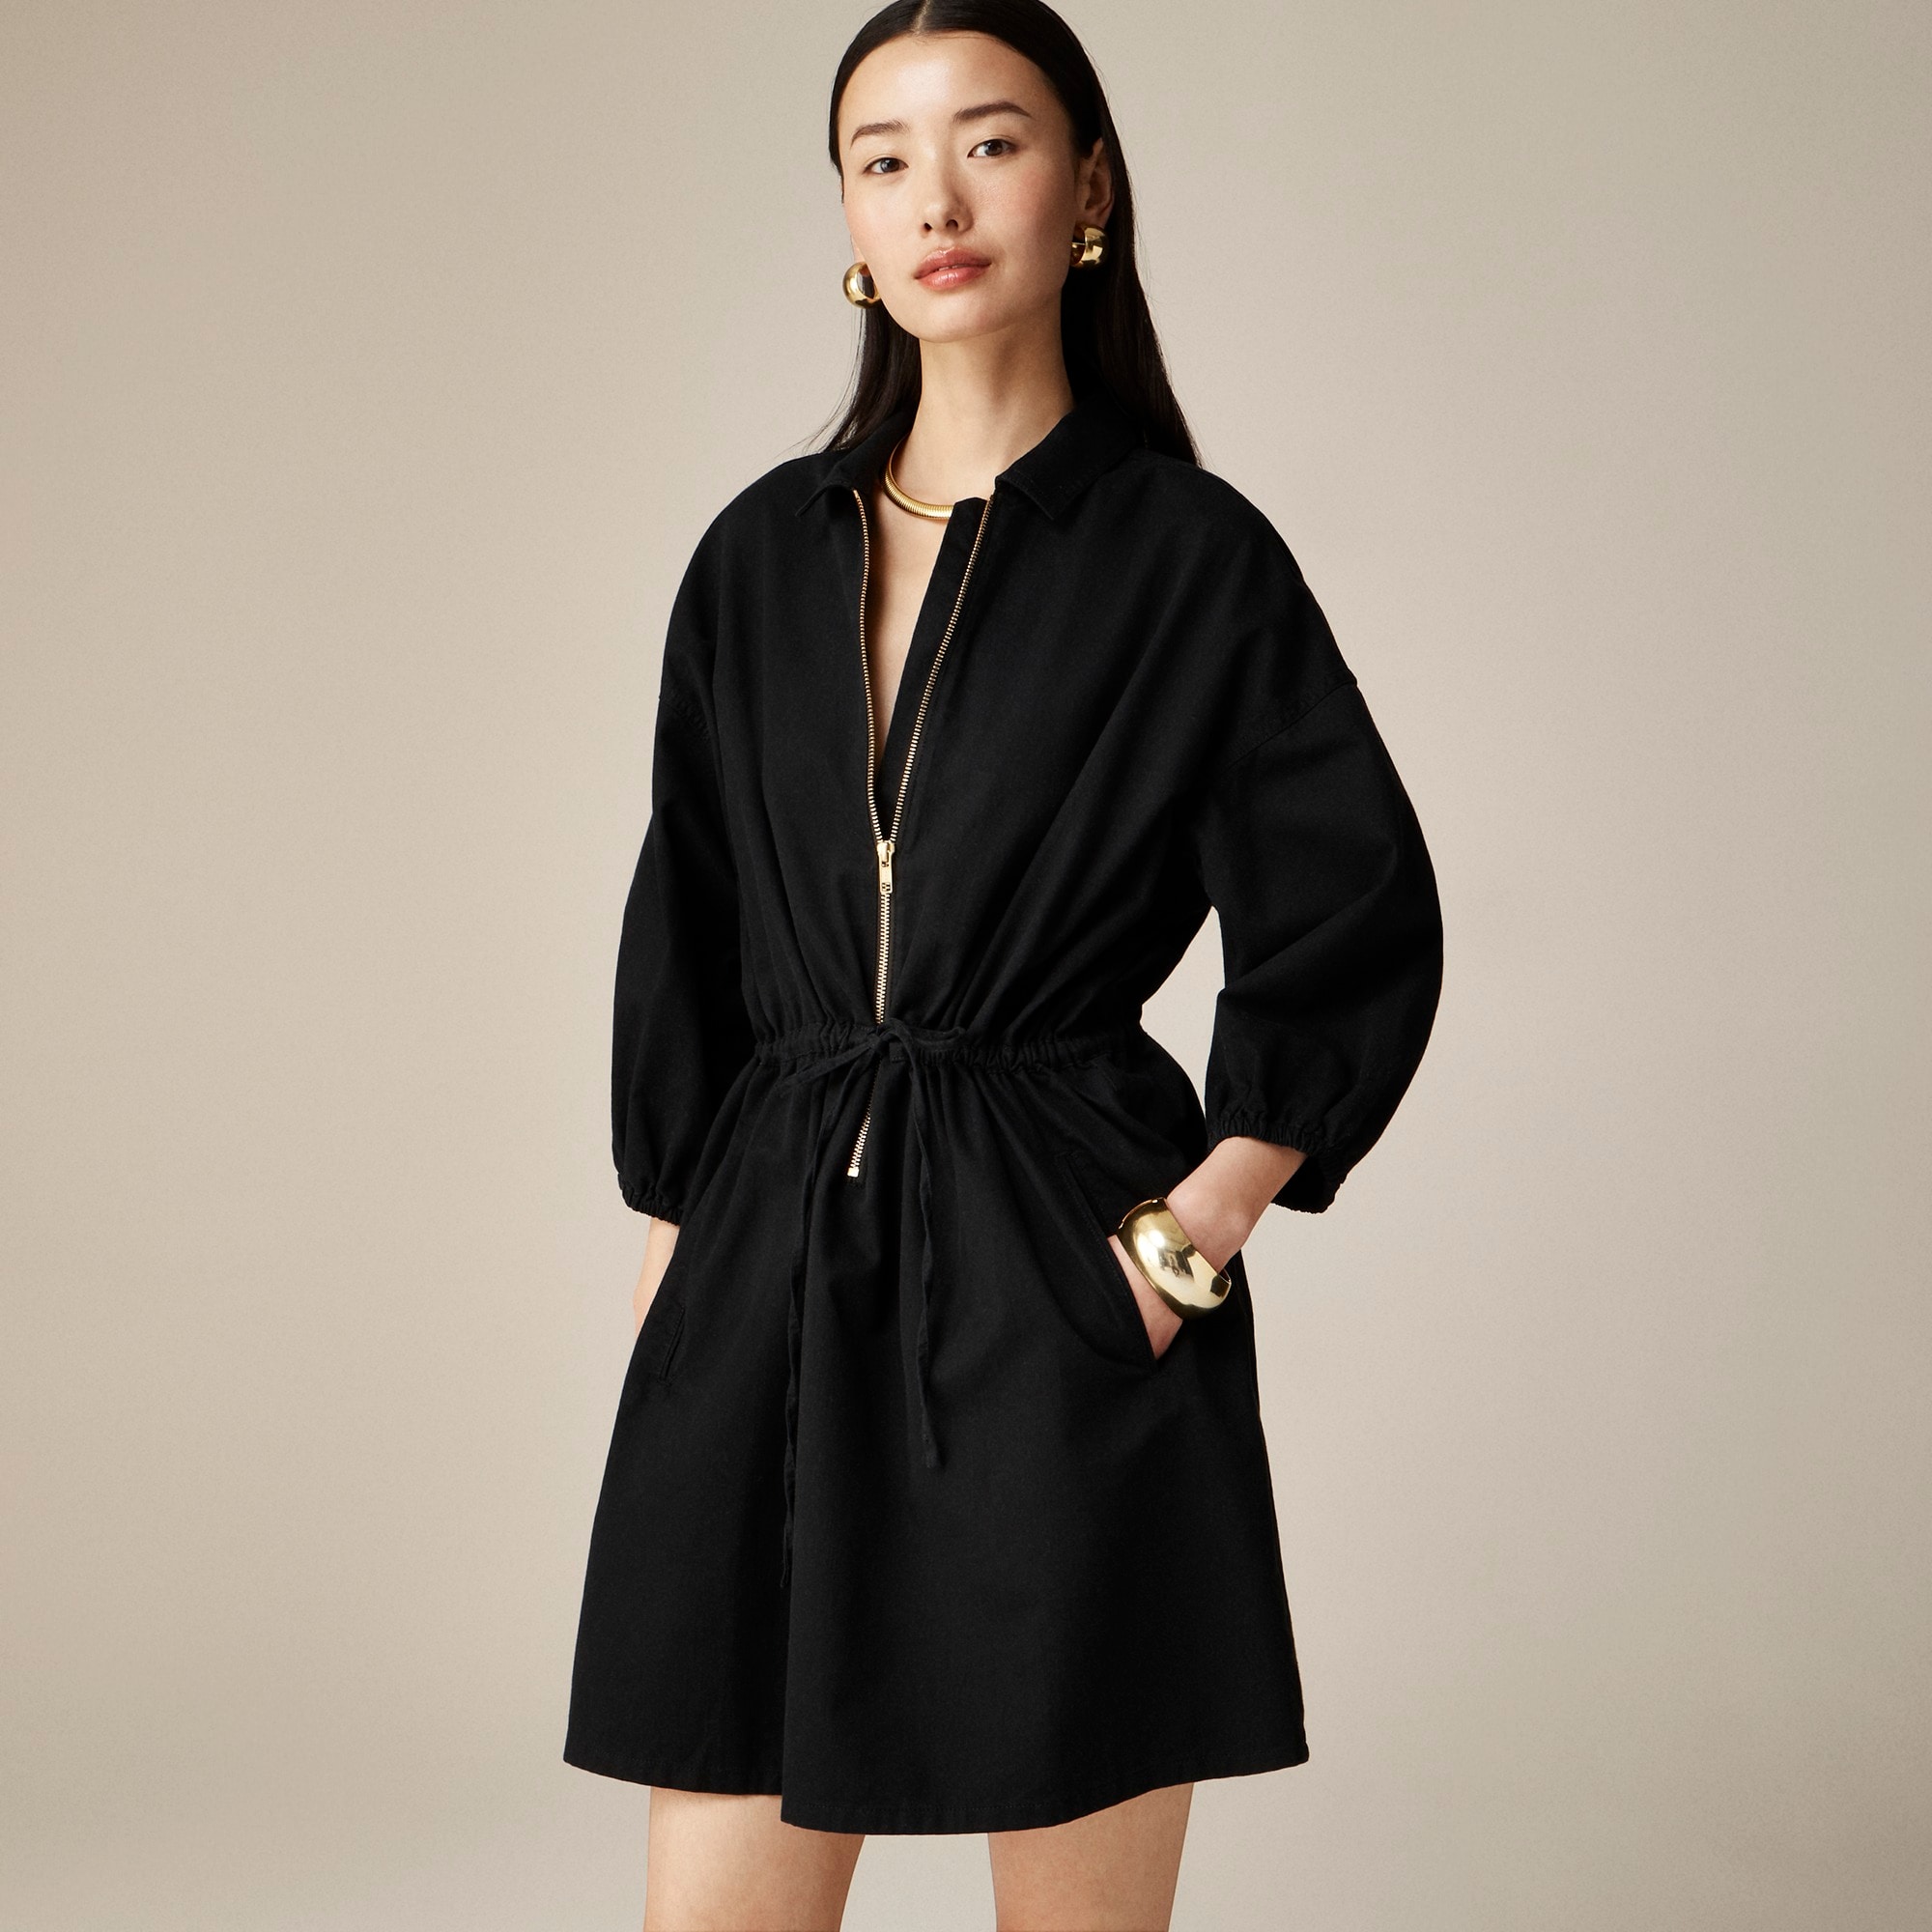  Cinched zip-up dress in drapey cotton